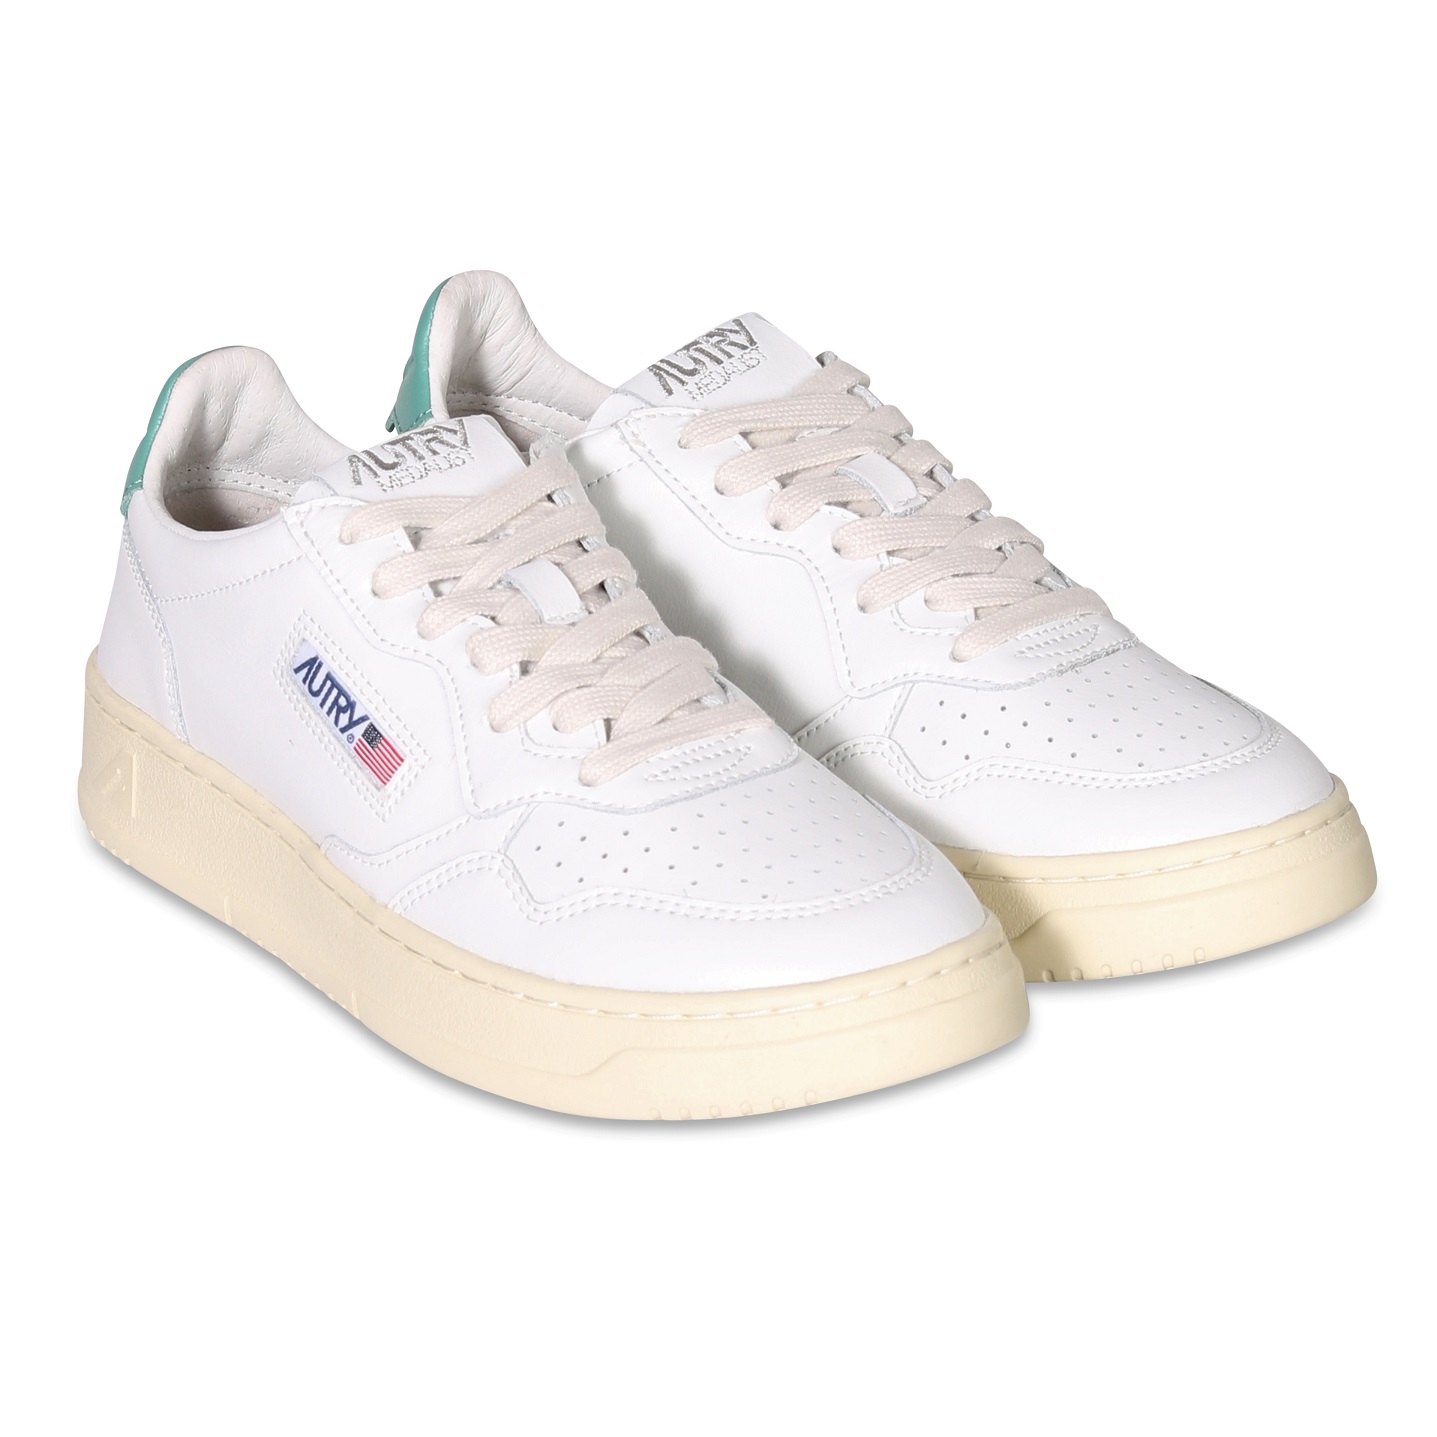 AUTRY ACTION SHOES Sneaker Low in White/Malachi Green 35